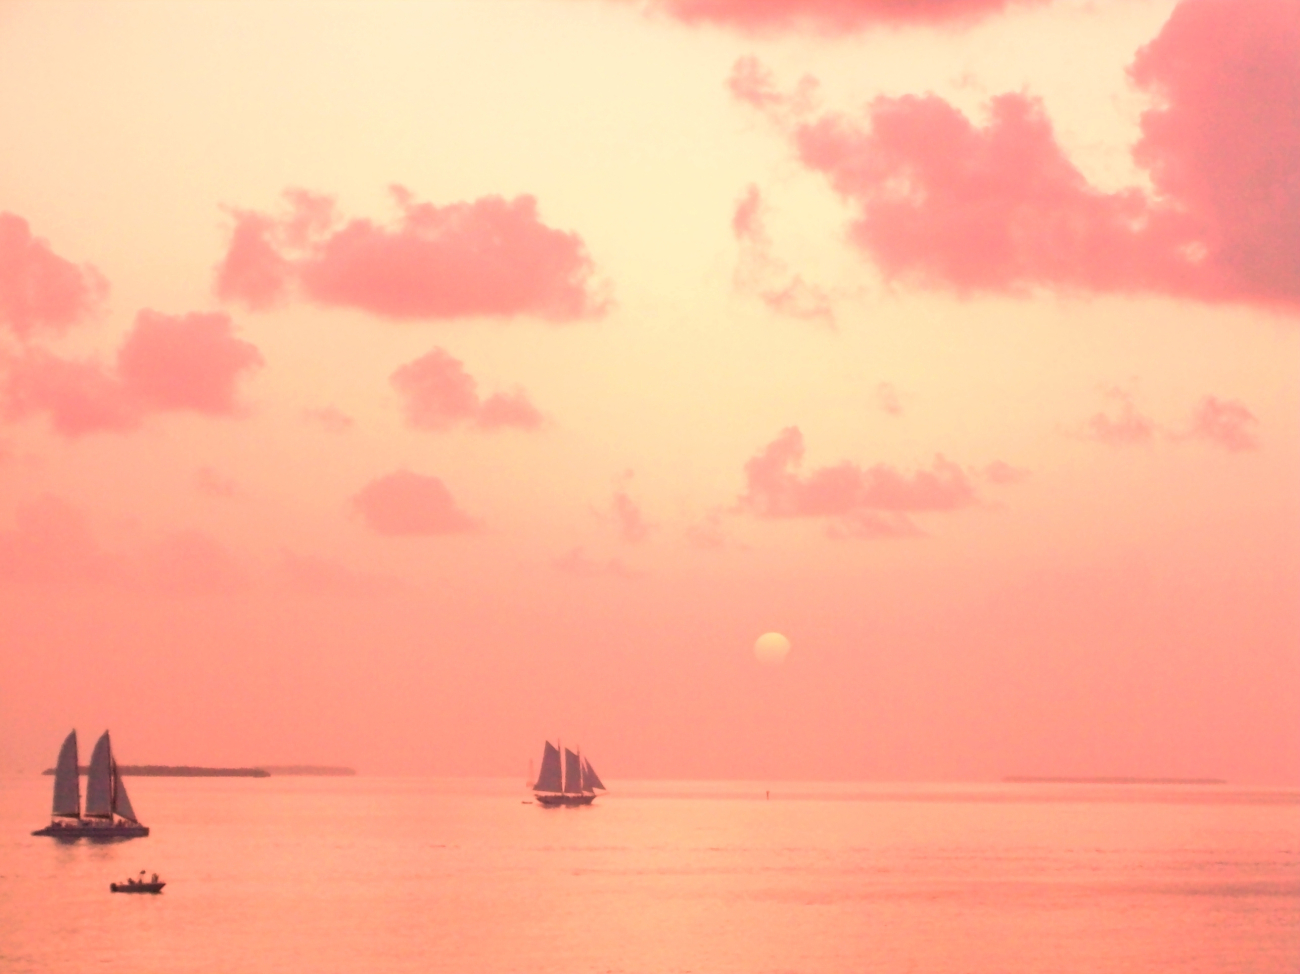 Sunset over the Gulf of Mexico - red sails in the sunset